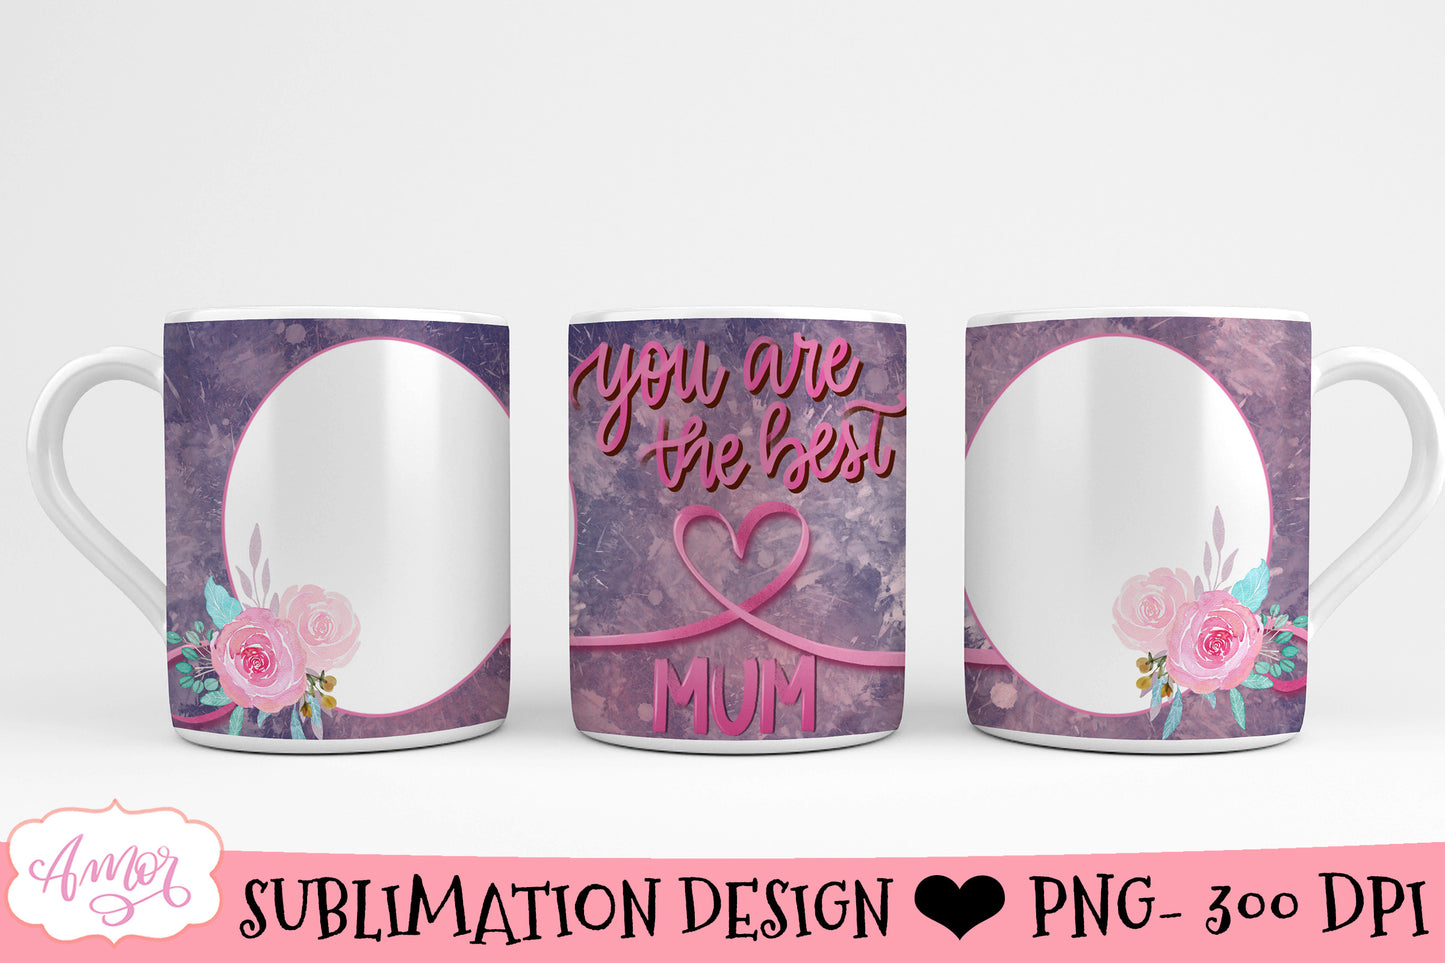 Mum Picture Mug Template for sublimation